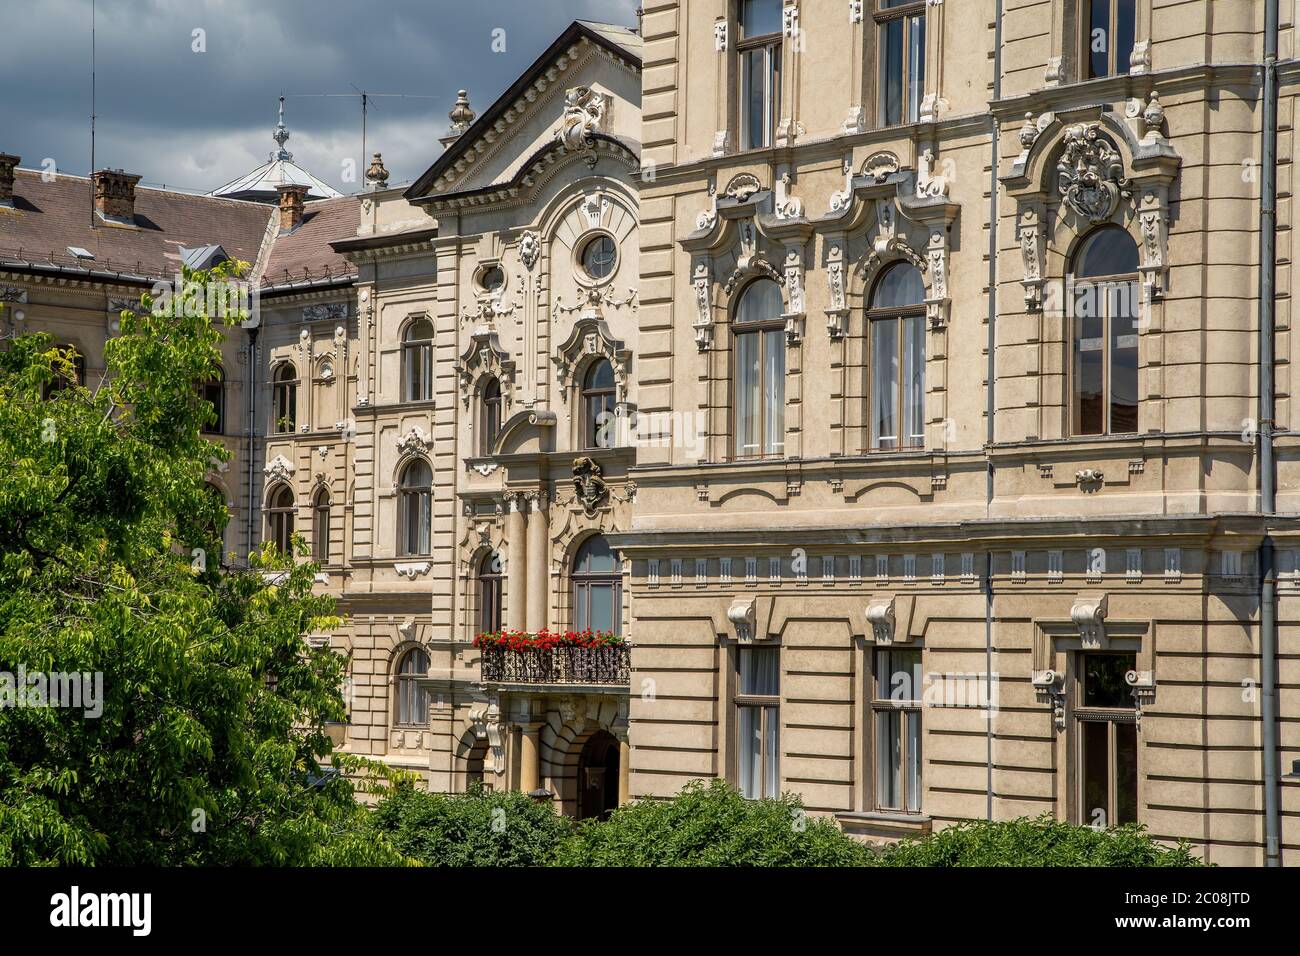 Detail of the back front of City Hall of Gyor. Hungary. The eclectic style building was completed in 1900. Stock Photo